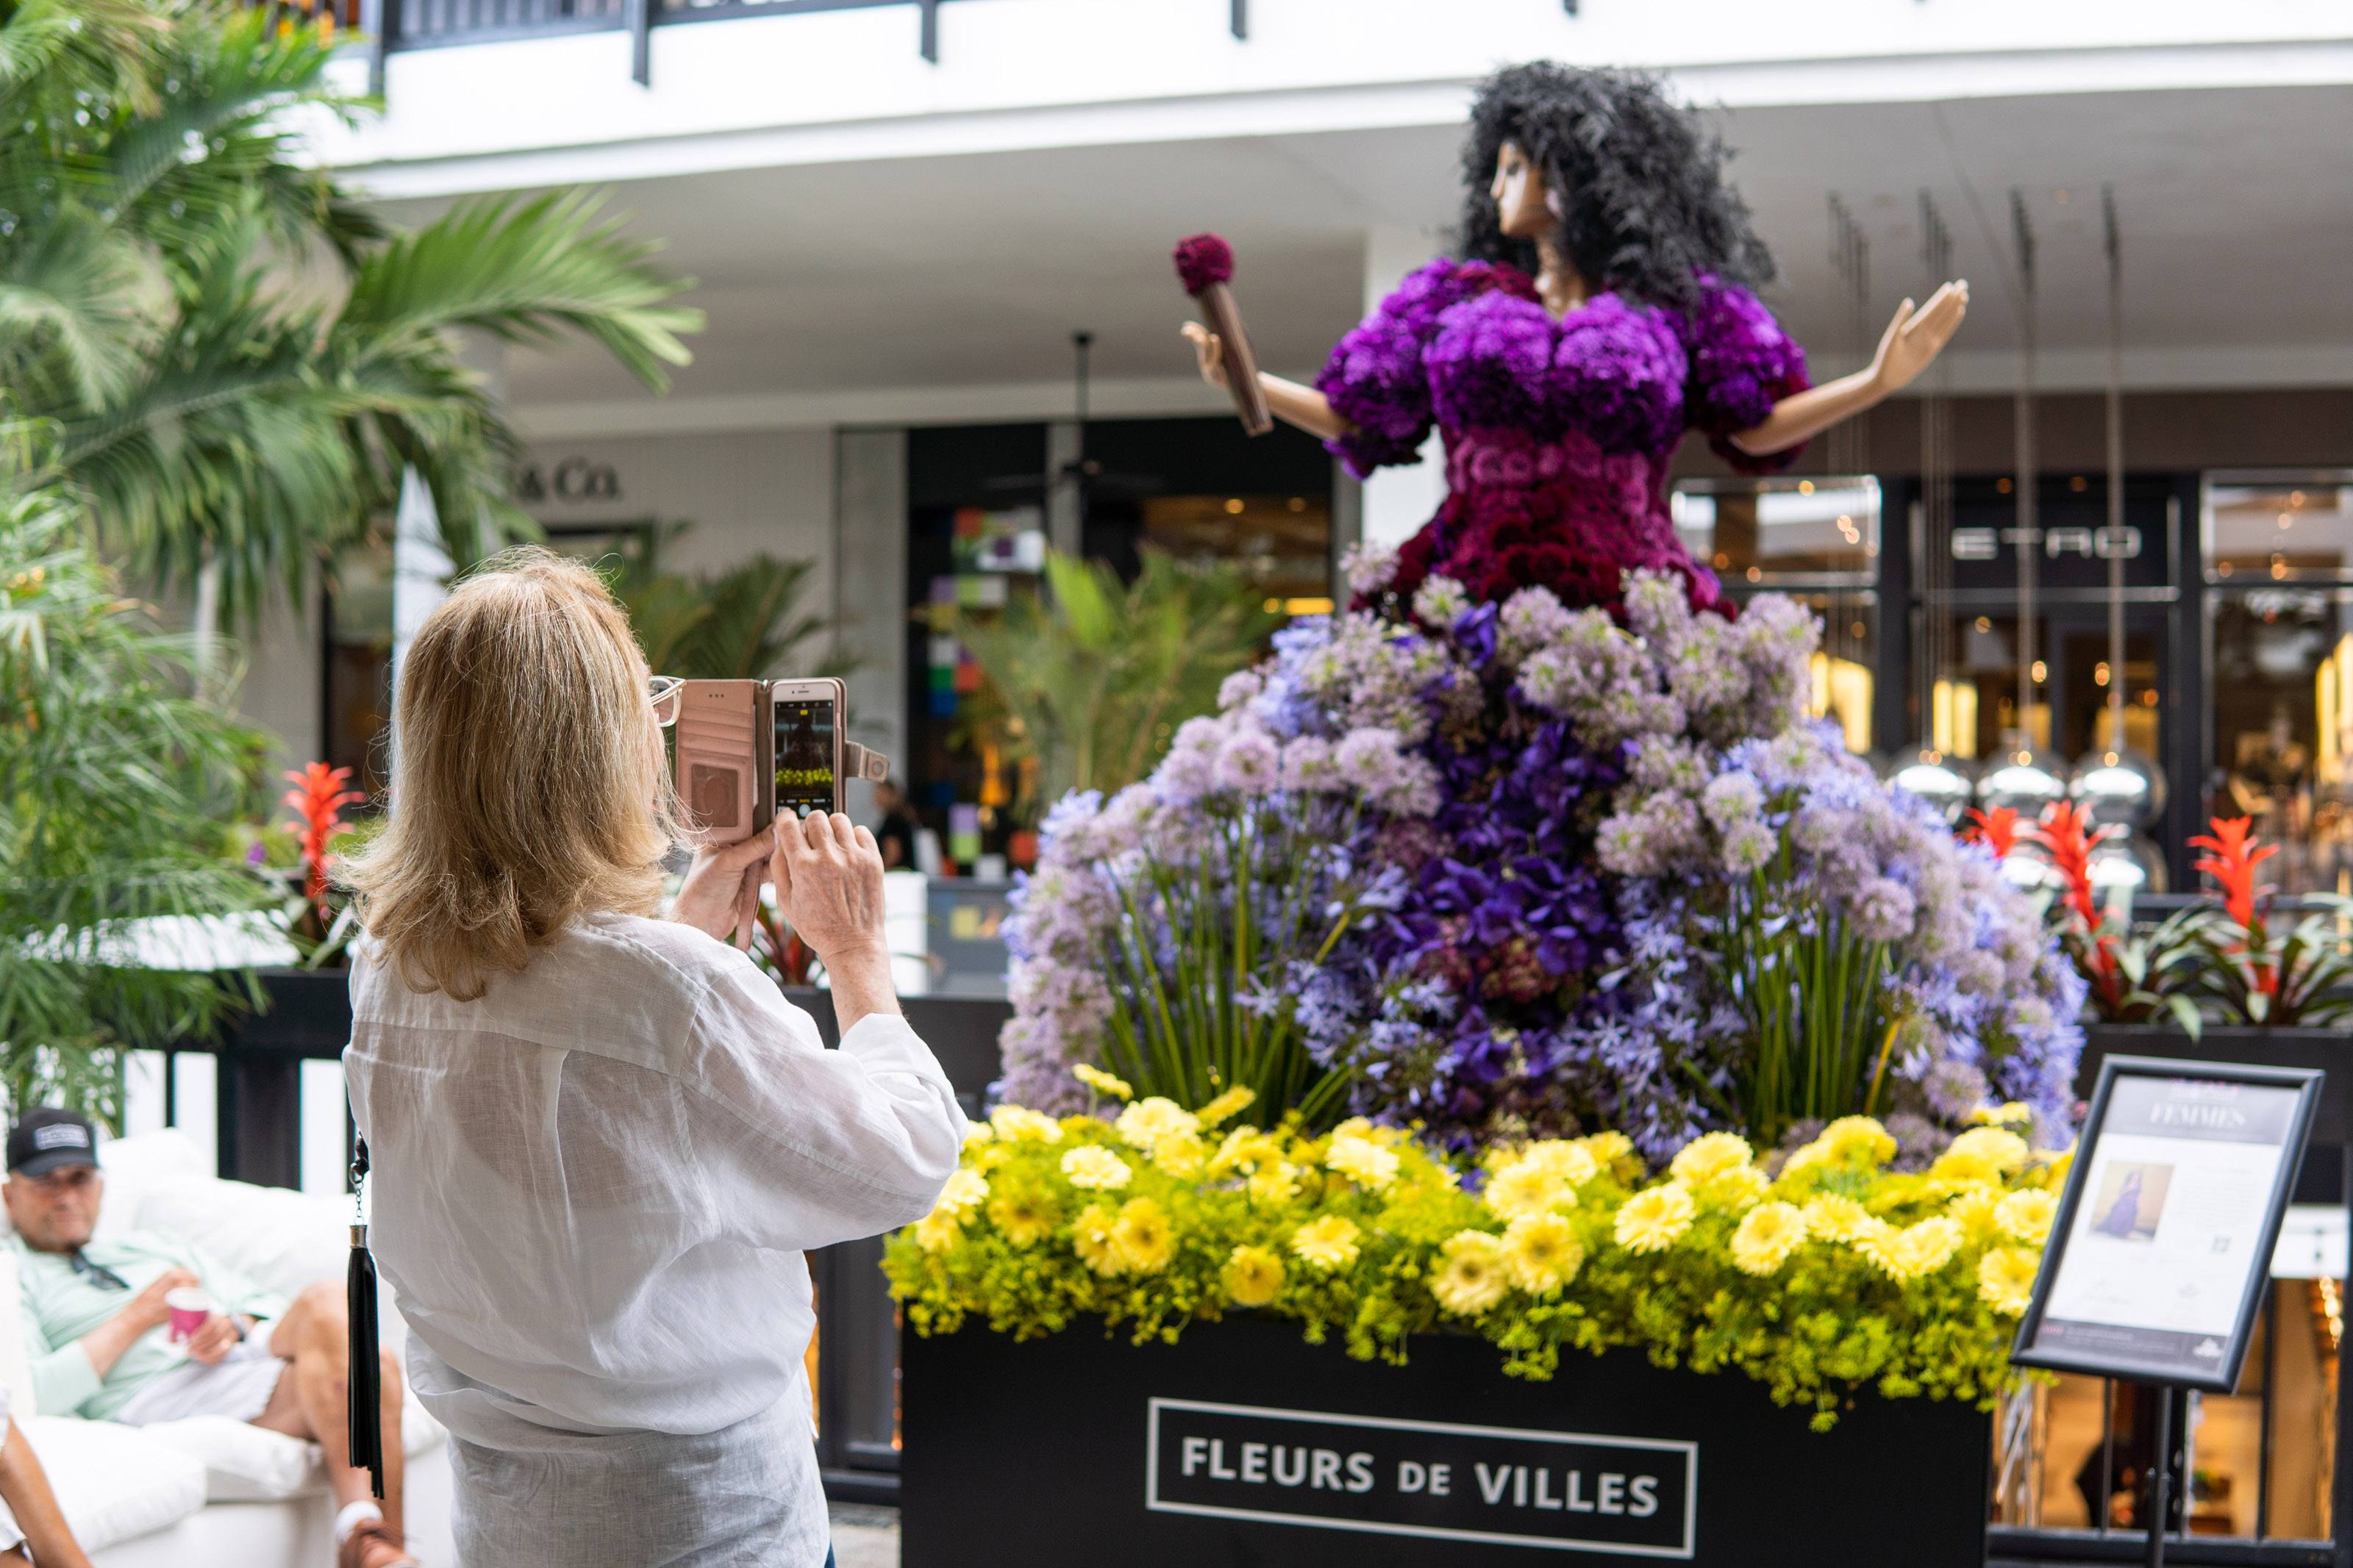 Woman takes a photo of an Oprah Winfrey inspired floral mannequin